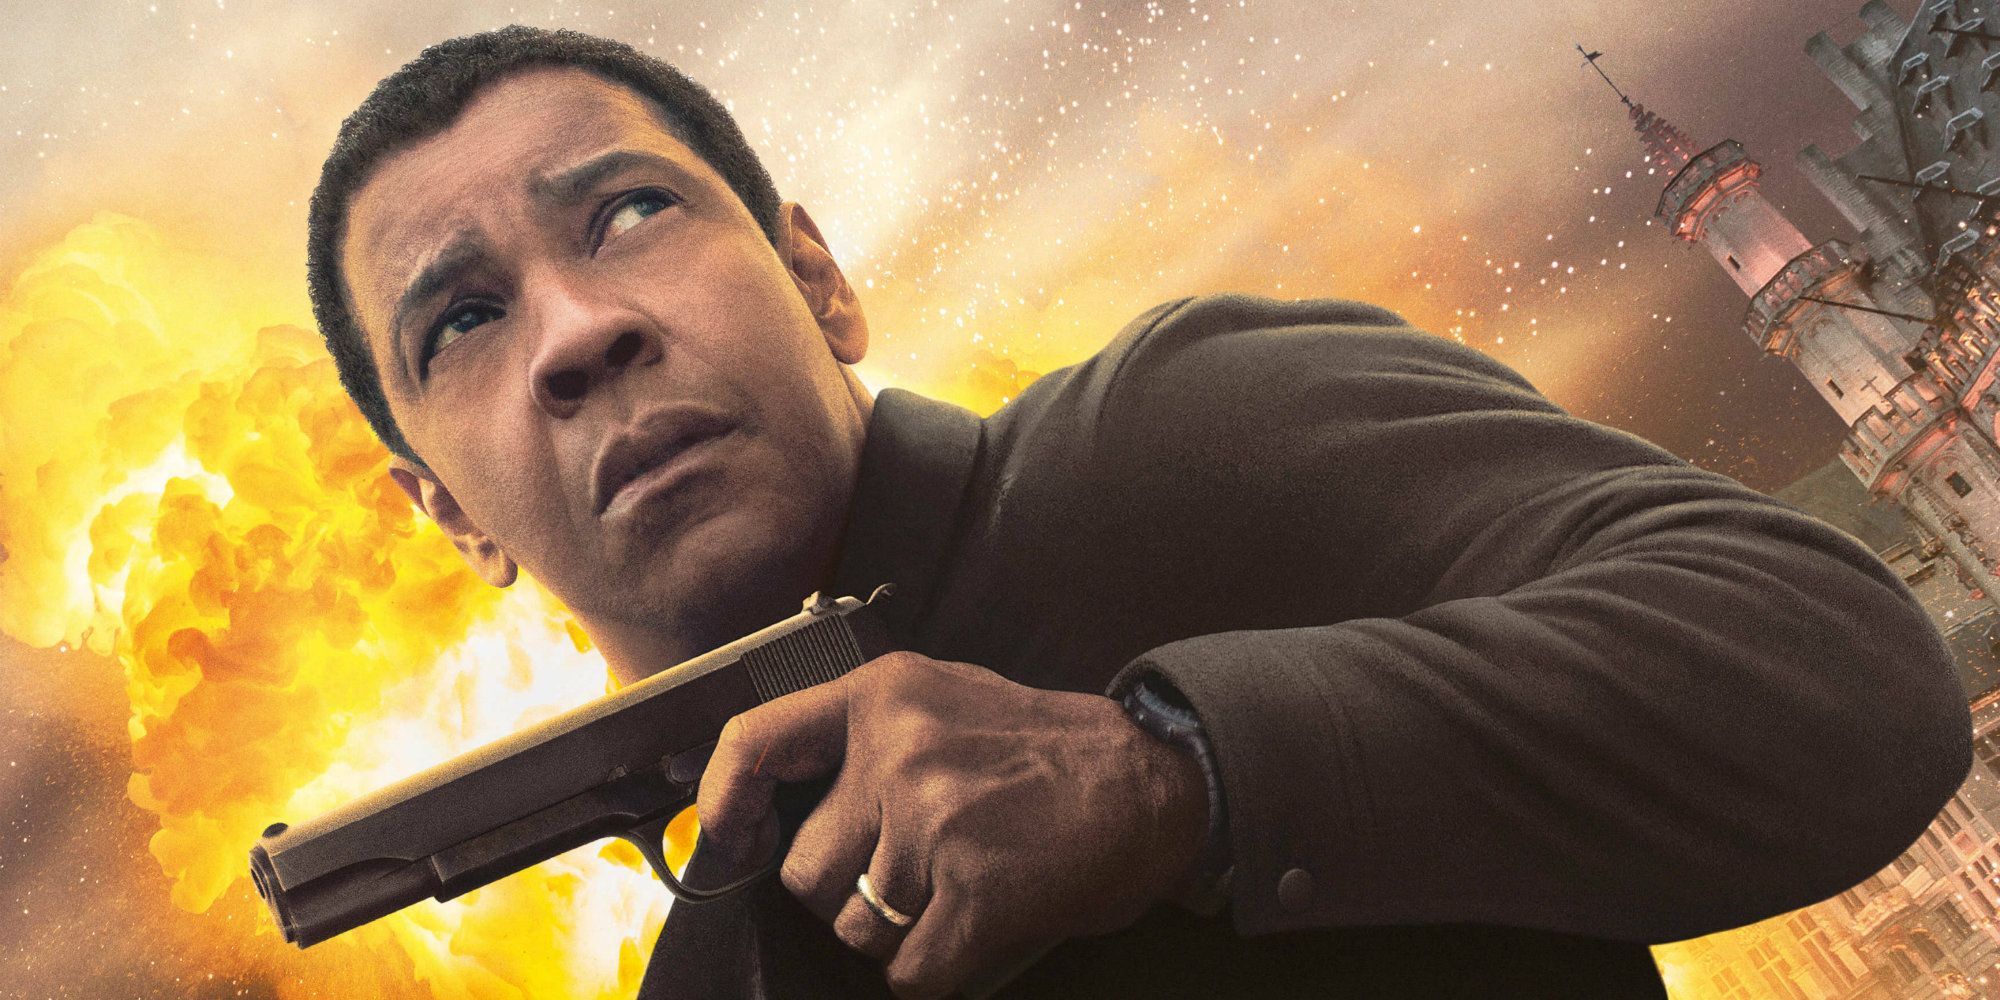 Movie Review: 'THE EQUALIZER 2' – murdering with a moral center